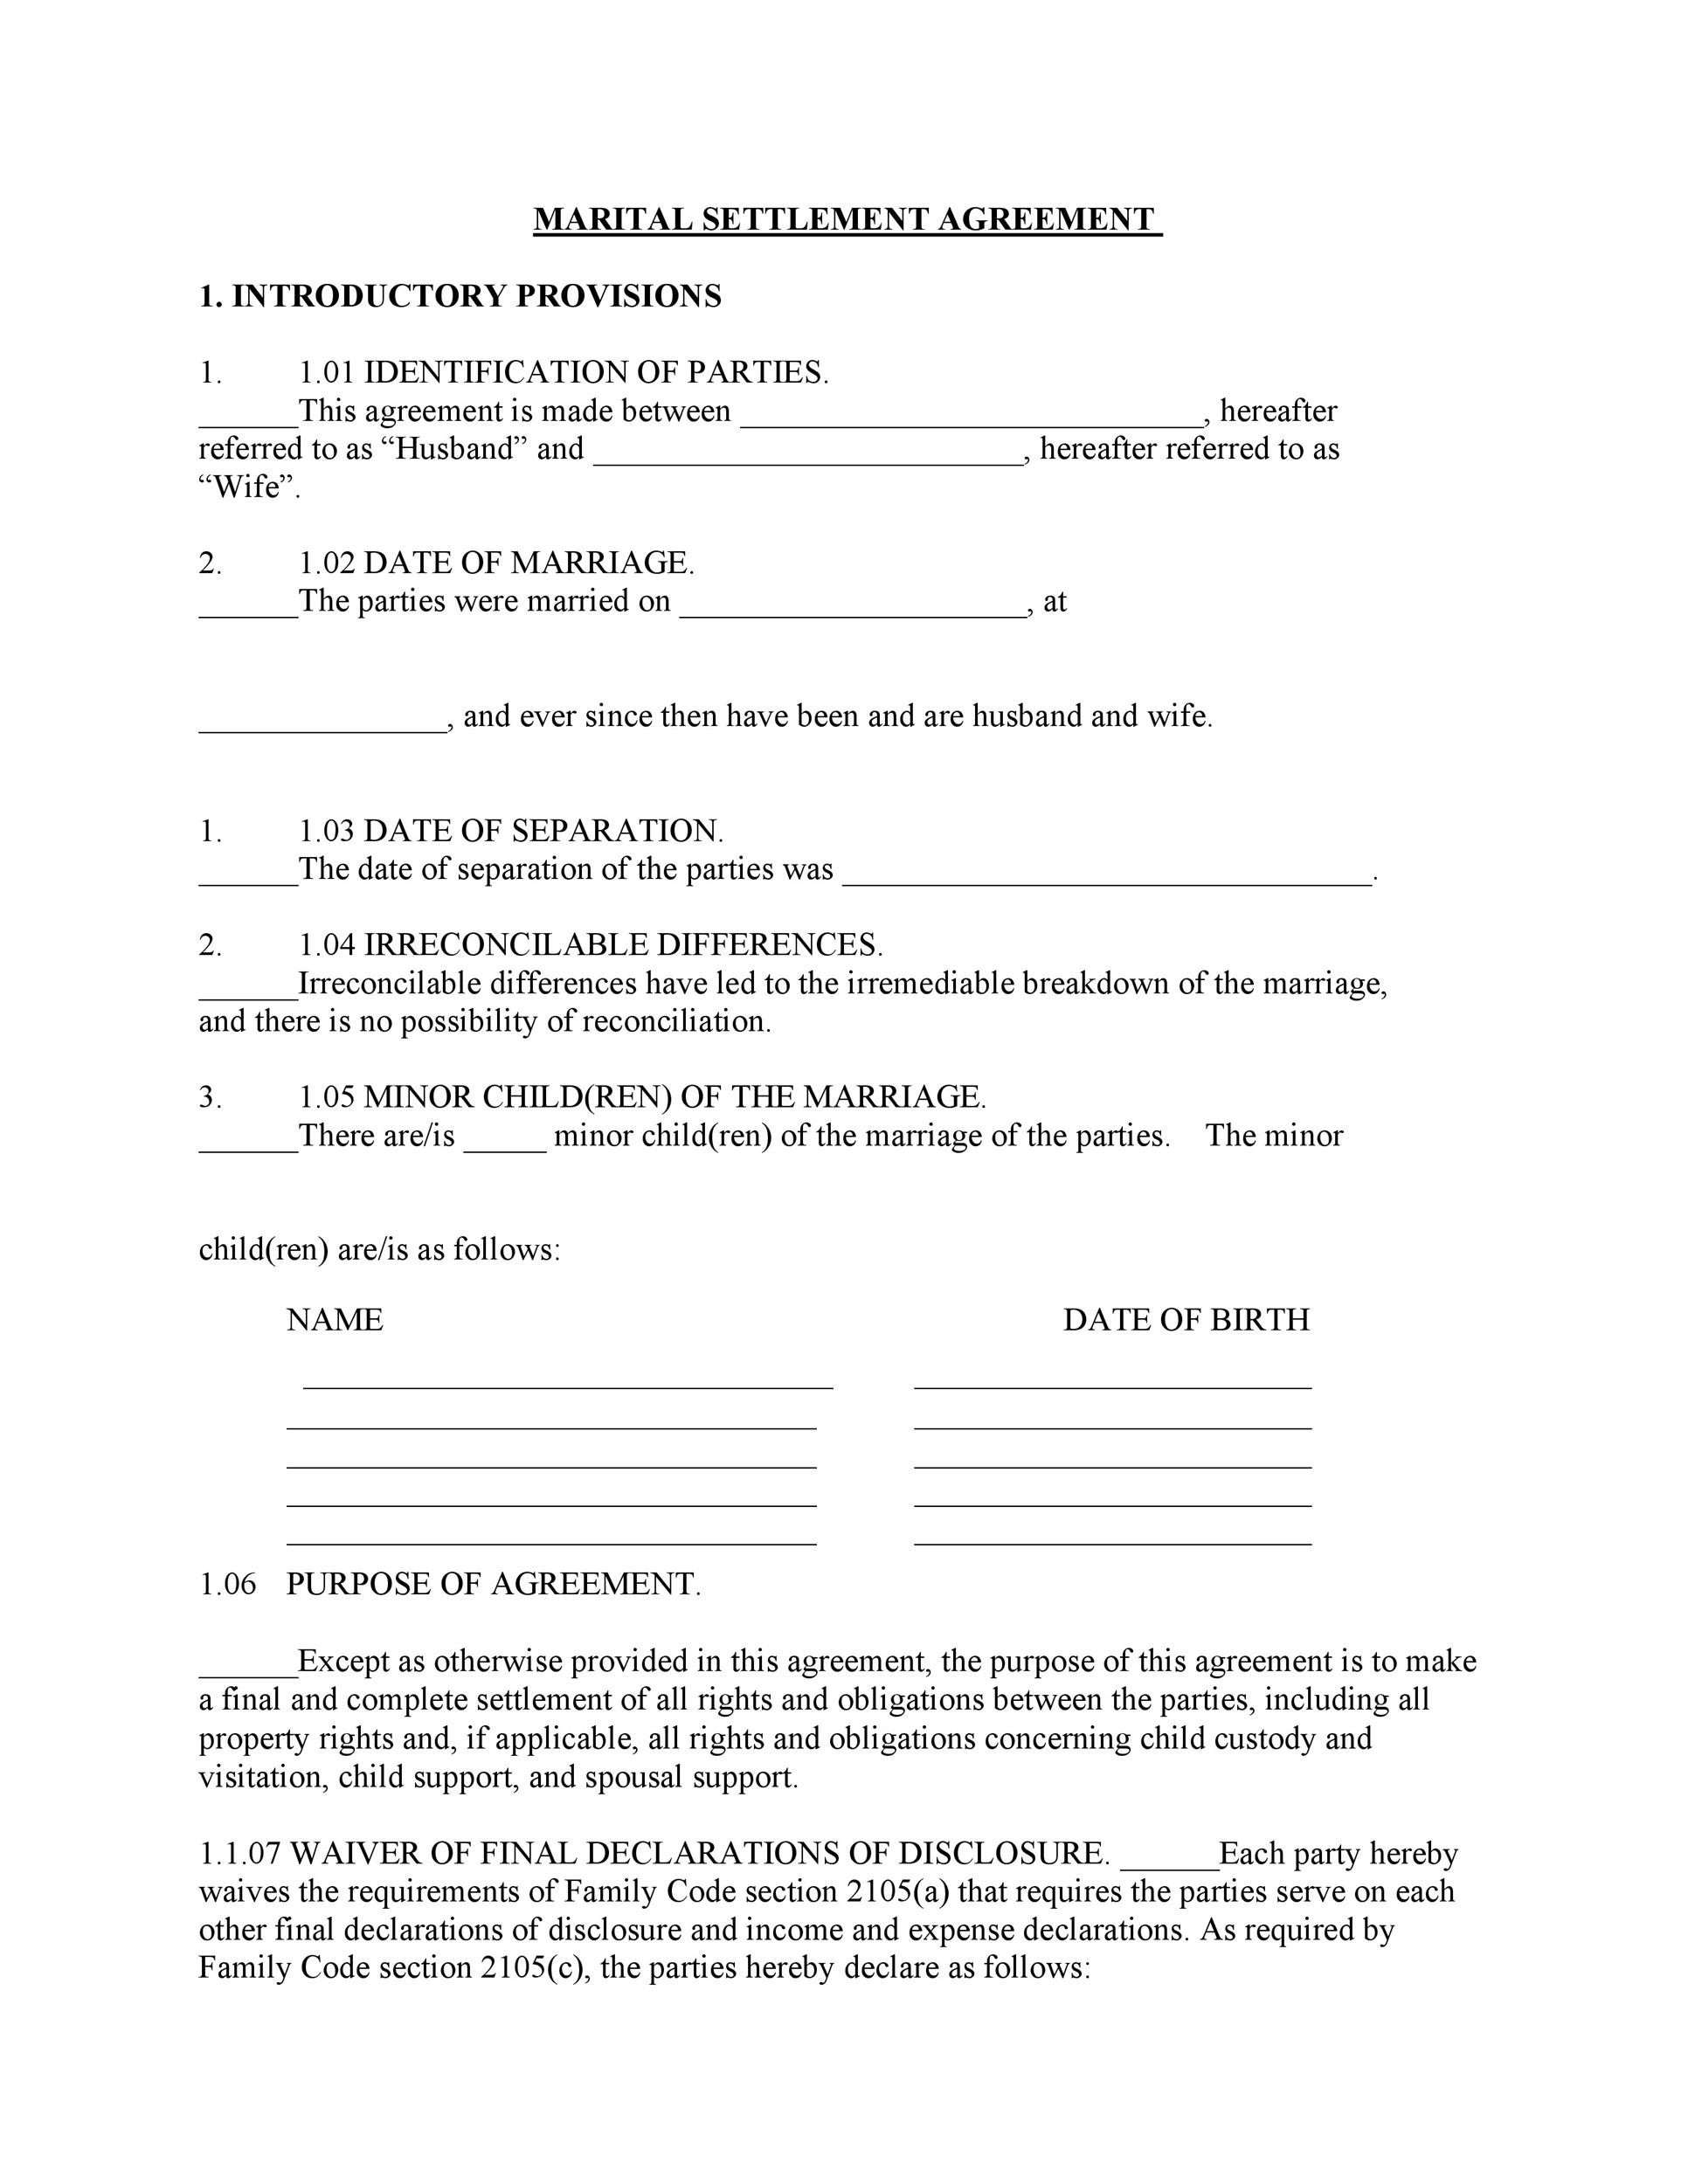 Free child support agreement 13